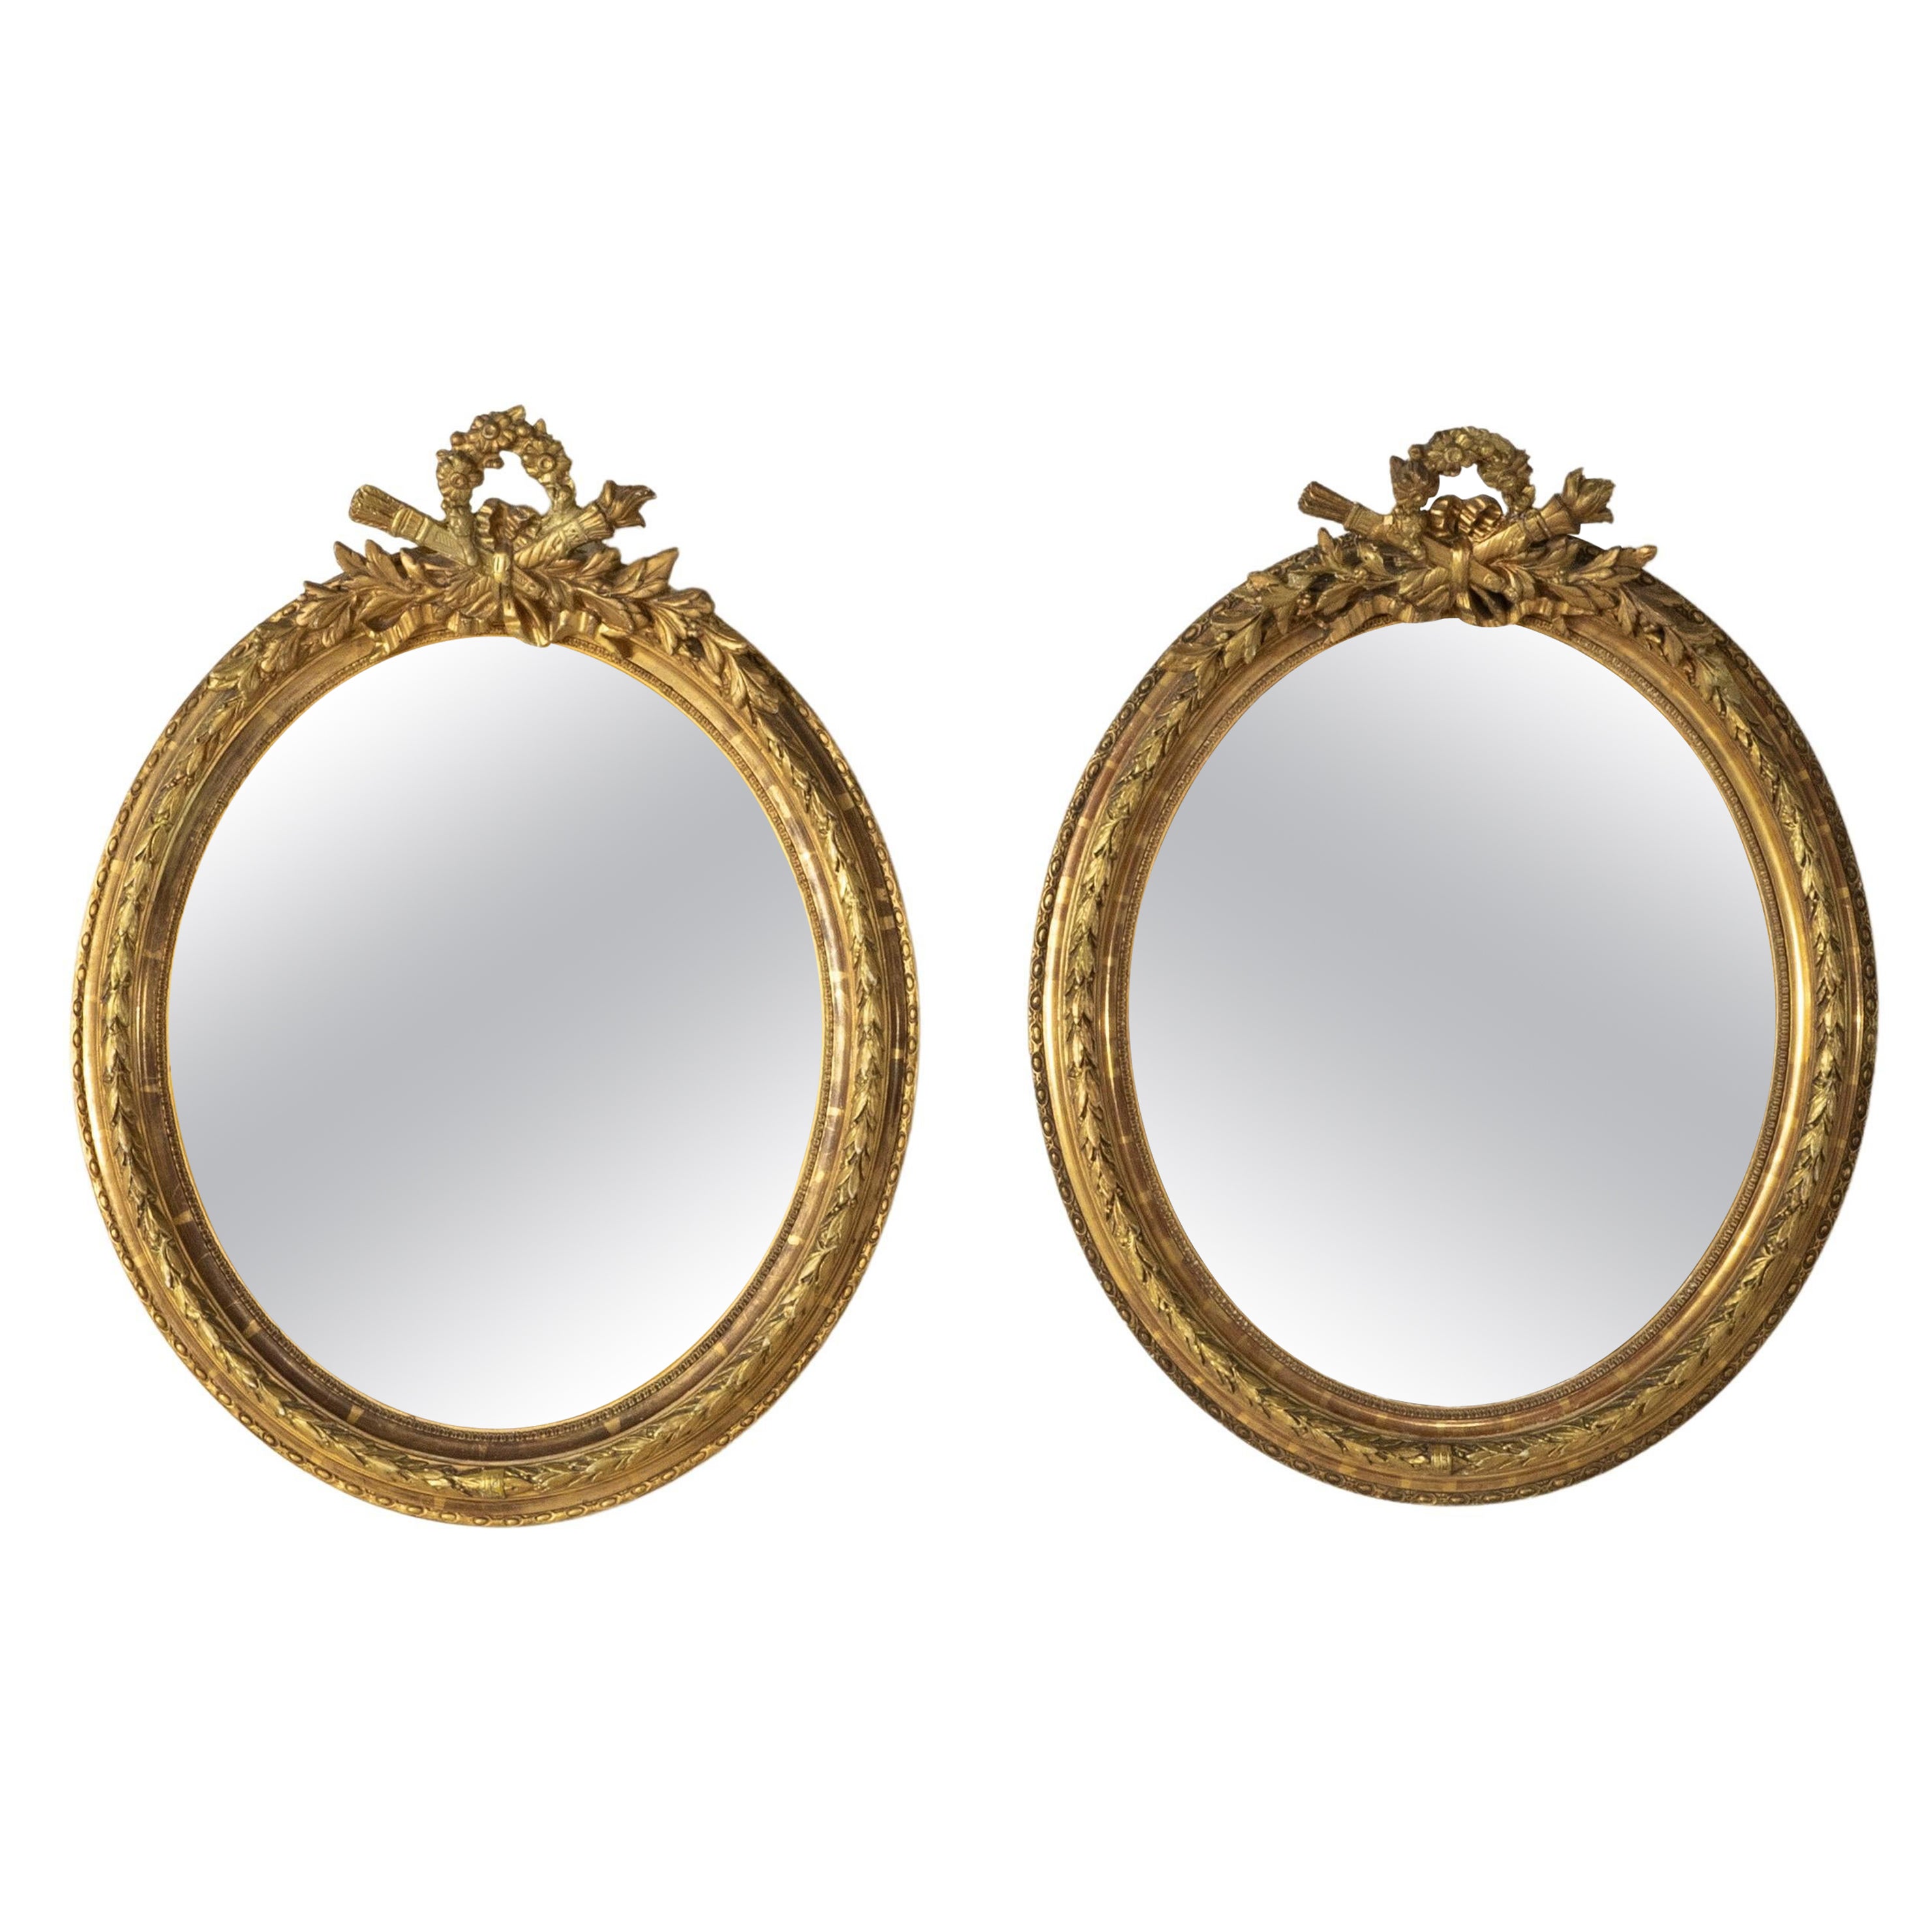 Pair of Late 19th Century French Louis XVI Style Oval Gilt Wood Mirrors 